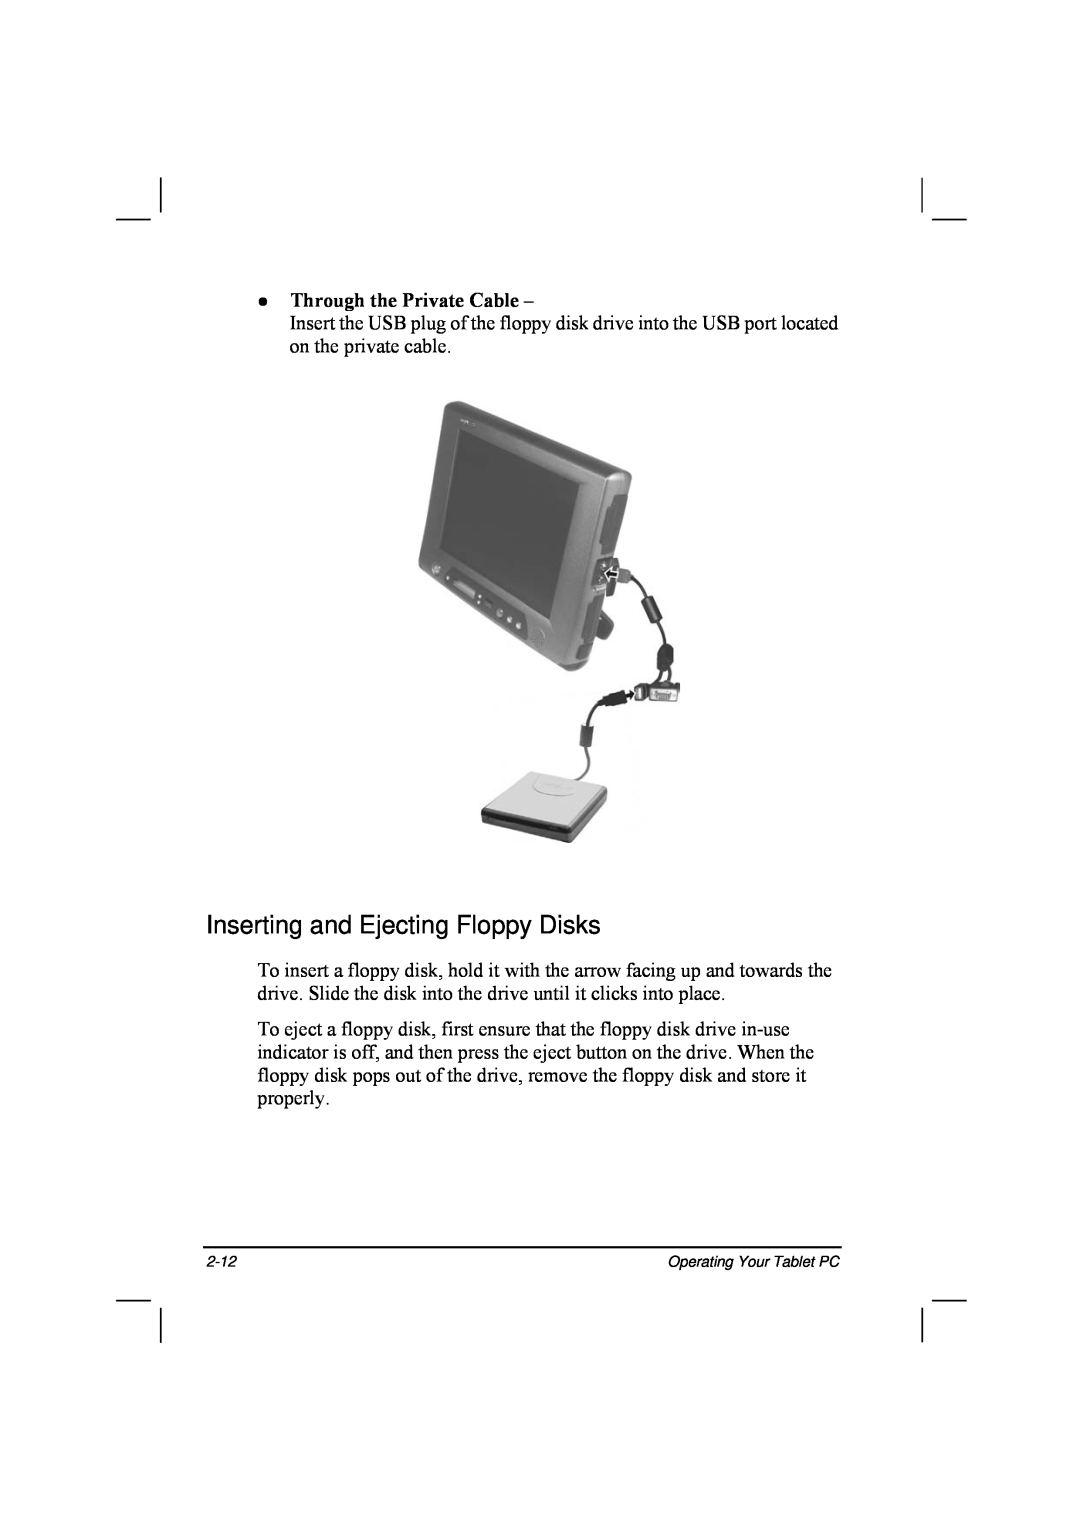 TAG 20 Series manual Inserting and Ejecting Floppy Disks, Through the Private Cable 